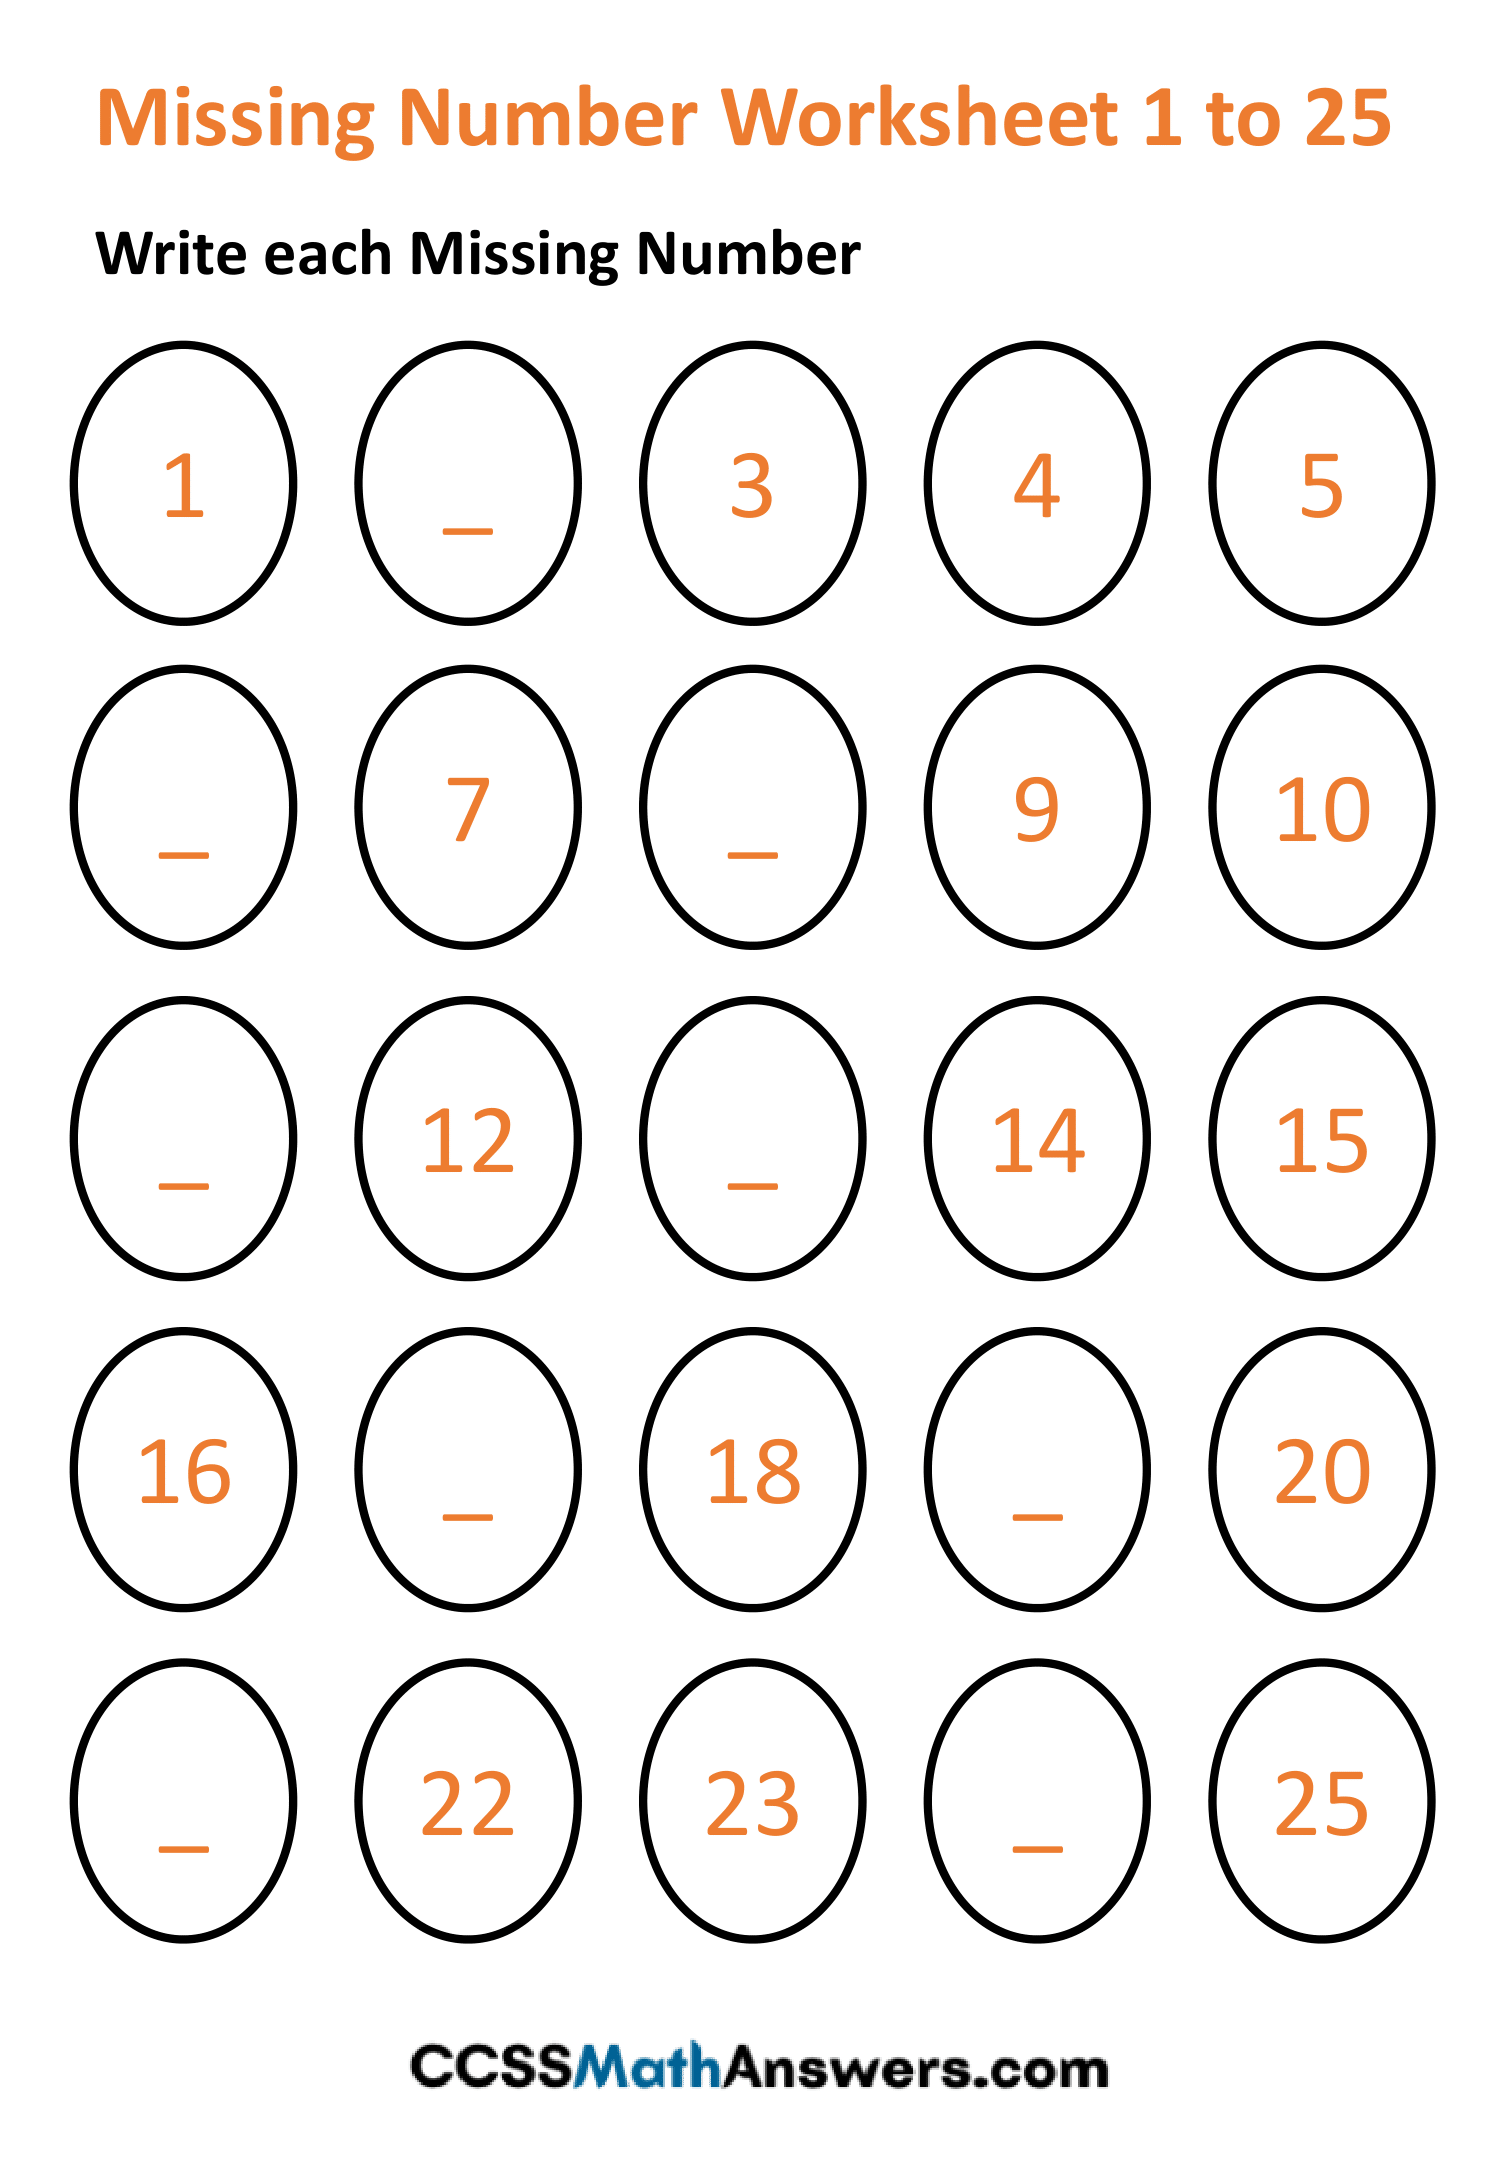 Fill in Missing Number Worksheet 1 to 25